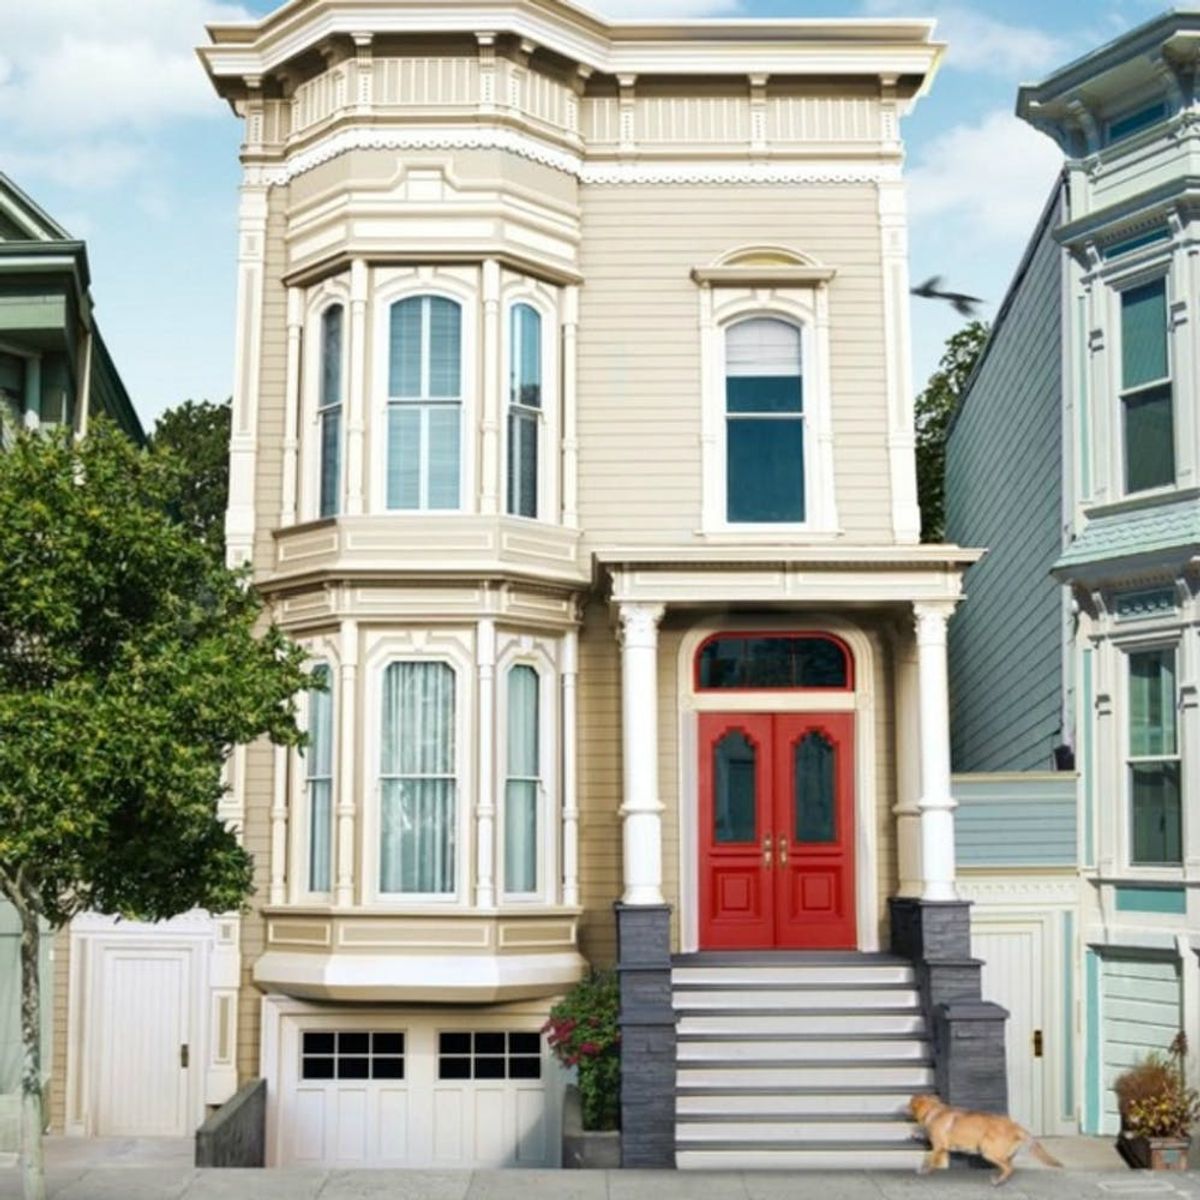 Get Excited: You Might Soon Be Able to Rent the Original Full House House